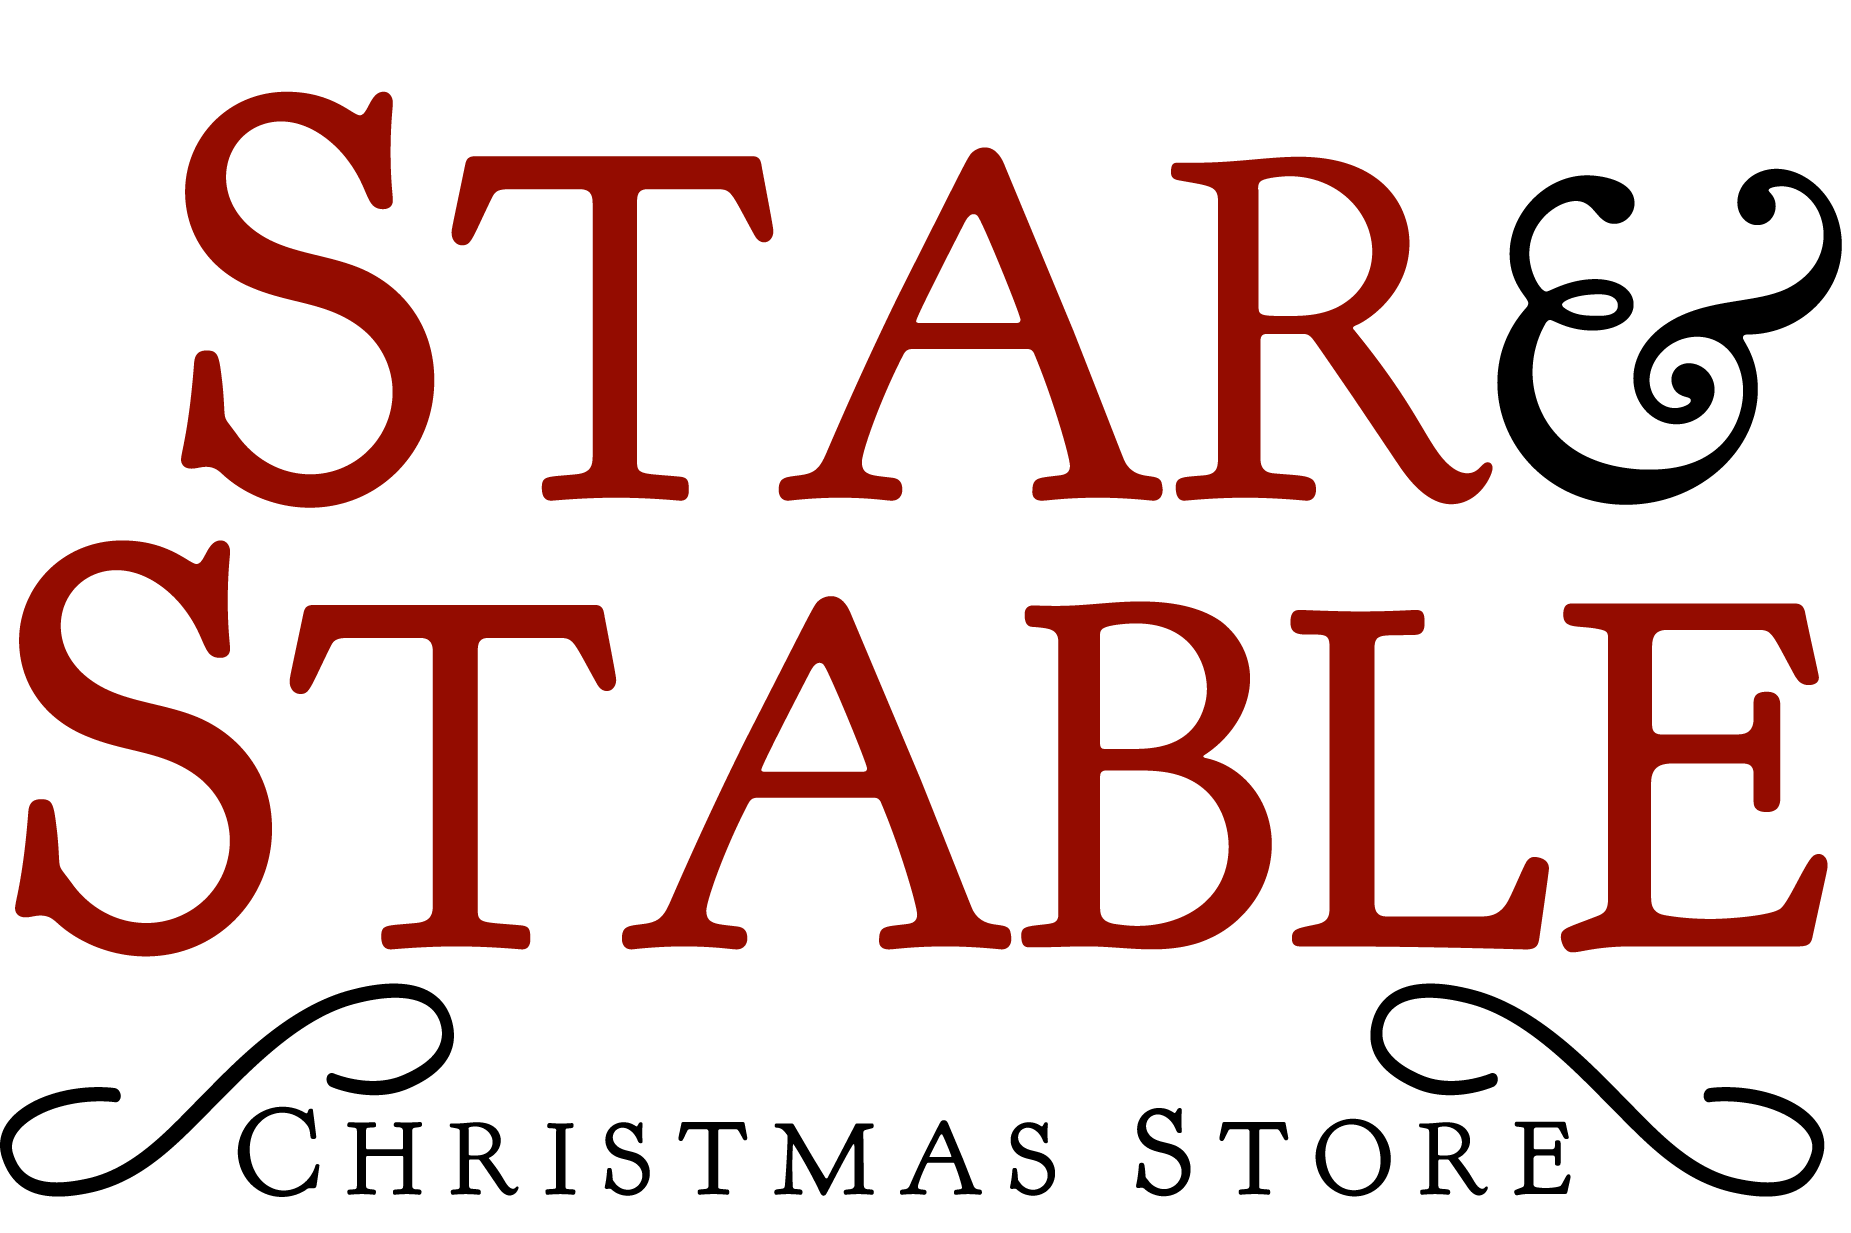 Star & Stable Christmas Store | Star & Stable Christmas Store